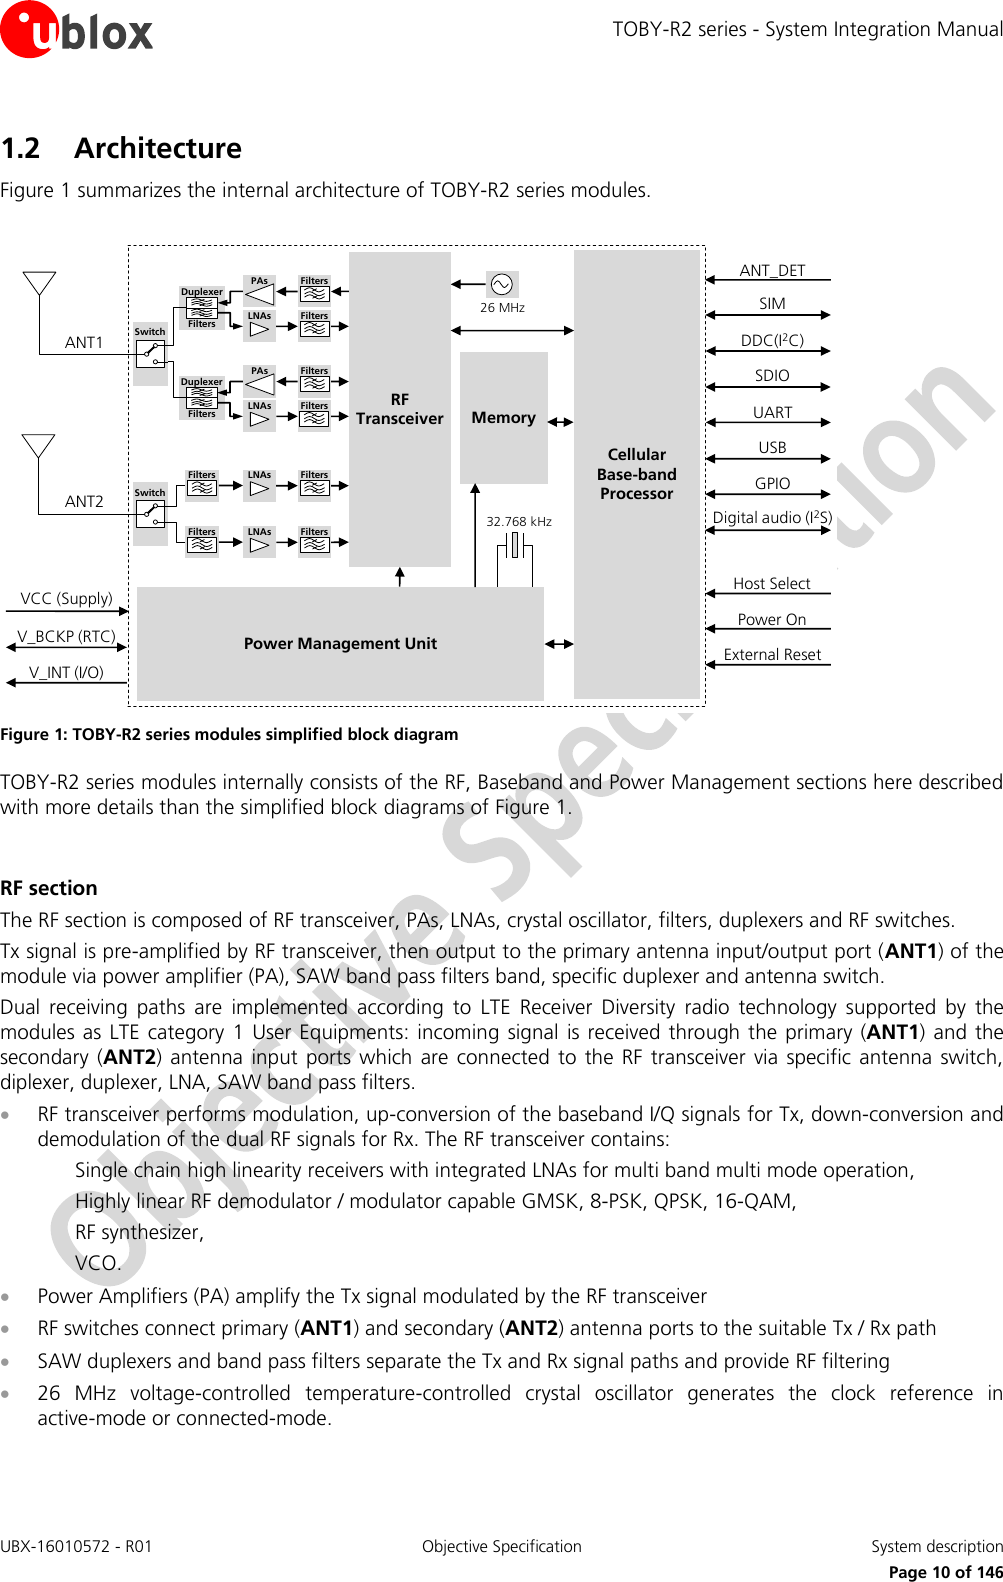 TOBY-R2 series - System Integration Manual UBX-16010572 - R01  Objective Specification  System description     Page 10 of 146 1.2 Architecture Figure 1 summarizes the internal architecture of TOBY-R2 series modules.  CellularBase-bandProcessorMemoryPower Management Unit26 MHz32.768 kHzANT1RF TransceiverANT2V_INT (I/O)V_BCKP (RTC)VCC (Supply)SIMUSBGPIOPower OnExternal ResetPAsLNAs FiltersFiltersDuplexerFiltersPAsLNAs FiltersFiltersDuplexerFiltersLNAs FiltersFiltersLNAs FiltersFiltersSwitchSwitchDDC(I2C)SDIOUARTDigital audio (I2S)ANT_DETHost Select Figure 1: TOBY-R2 series modules simplified block diagram TOBY-R2 series modules internally consists of the RF, Baseband and Power Management sections here described with more details than the simplified block diagrams of Figure 1.  RF section The RF section is composed of RF transceiver, PAs, LNAs, crystal oscillator, filters, duplexers and RF switches. Tx signal is pre-amplified by RF transceiver, then output to the primary antenna input/output port (ANT1) of the module via power amplifier (PA), SAW band pass filters band, specific duplexer and antenna switch. Dual  receiving  paths  are  implemented  according  to  LTE  Receiver  Diversity  radio  technology  supported  by  the modules as LTE  category  1 User Equipments: incoming signal is received  through the  primary (ANT1) and the secondary  (ANT2)  antenna  input ports which  are connected  to the  RF  transceiver via  specific antenna  switch, diplexer, duplexer, LNA, SAW band pass filters.   RF transceiver performs modulation, up-conversion of the baseband I/Q signals for Tx, down-conversion and demodulation of the dual RF signals for Rx. The RF transceiver contains: Single chain high linearity receivers with integrated LNAs for multi band multi mode operation, Highly linear RF demodulator / modulator capable GMSK, 8-PSK, QPSK, 16-QAM,  RF synthesizer, VCO.  Power Amplifiers (PA) amplify the Tx signal modulated by the RF transceiver   RF switches connect primary (ANT1) and secondary (ANT2) antenna ports to the suitable Tx / Rx path  SAW duplexers and band pass filters separate the Tx and Rx signal paths and provide RF filtering  26  MHz  voltage-controlled  temperature-controlled  crystal  oscillator  generates  the  clock  reference  in active-mode or connected-mode.  